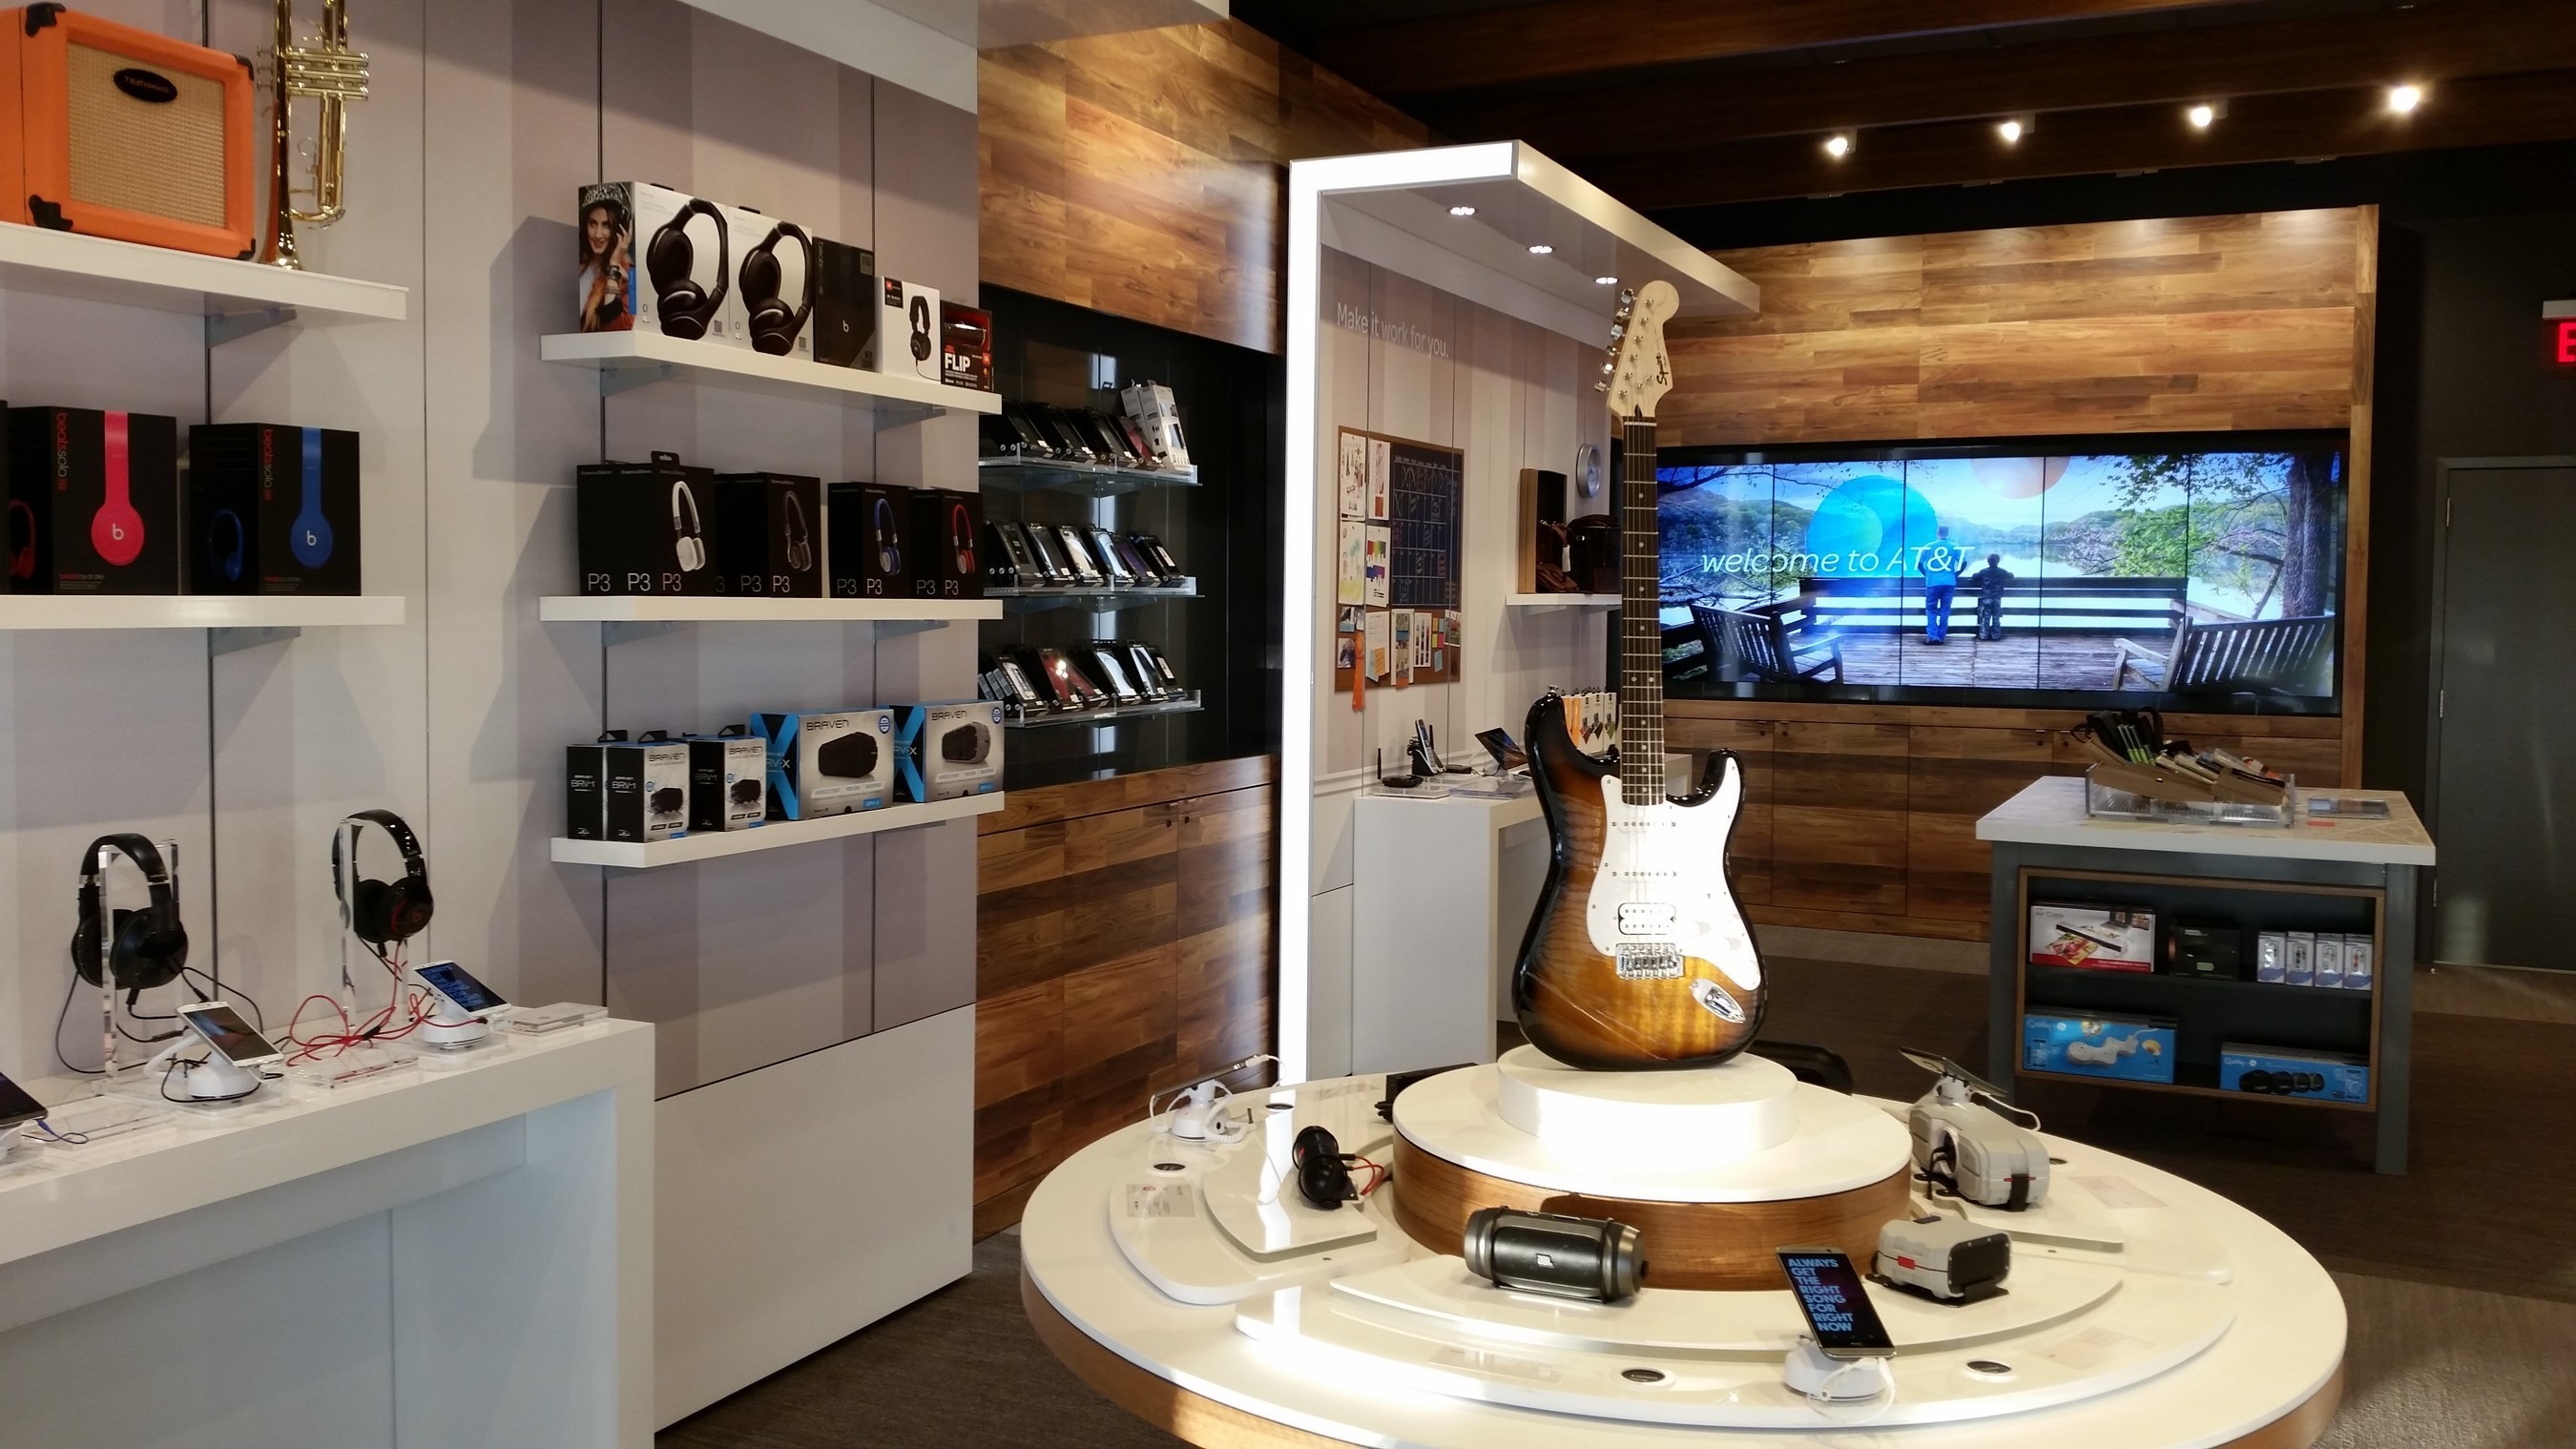 AT&T's new store concept in Spokane - the first of its kind in Washington State - was the result of more than two years of exploration and research all centered around one design goal: to create a more interactive and inviting store environment, a shopping experience like no other.